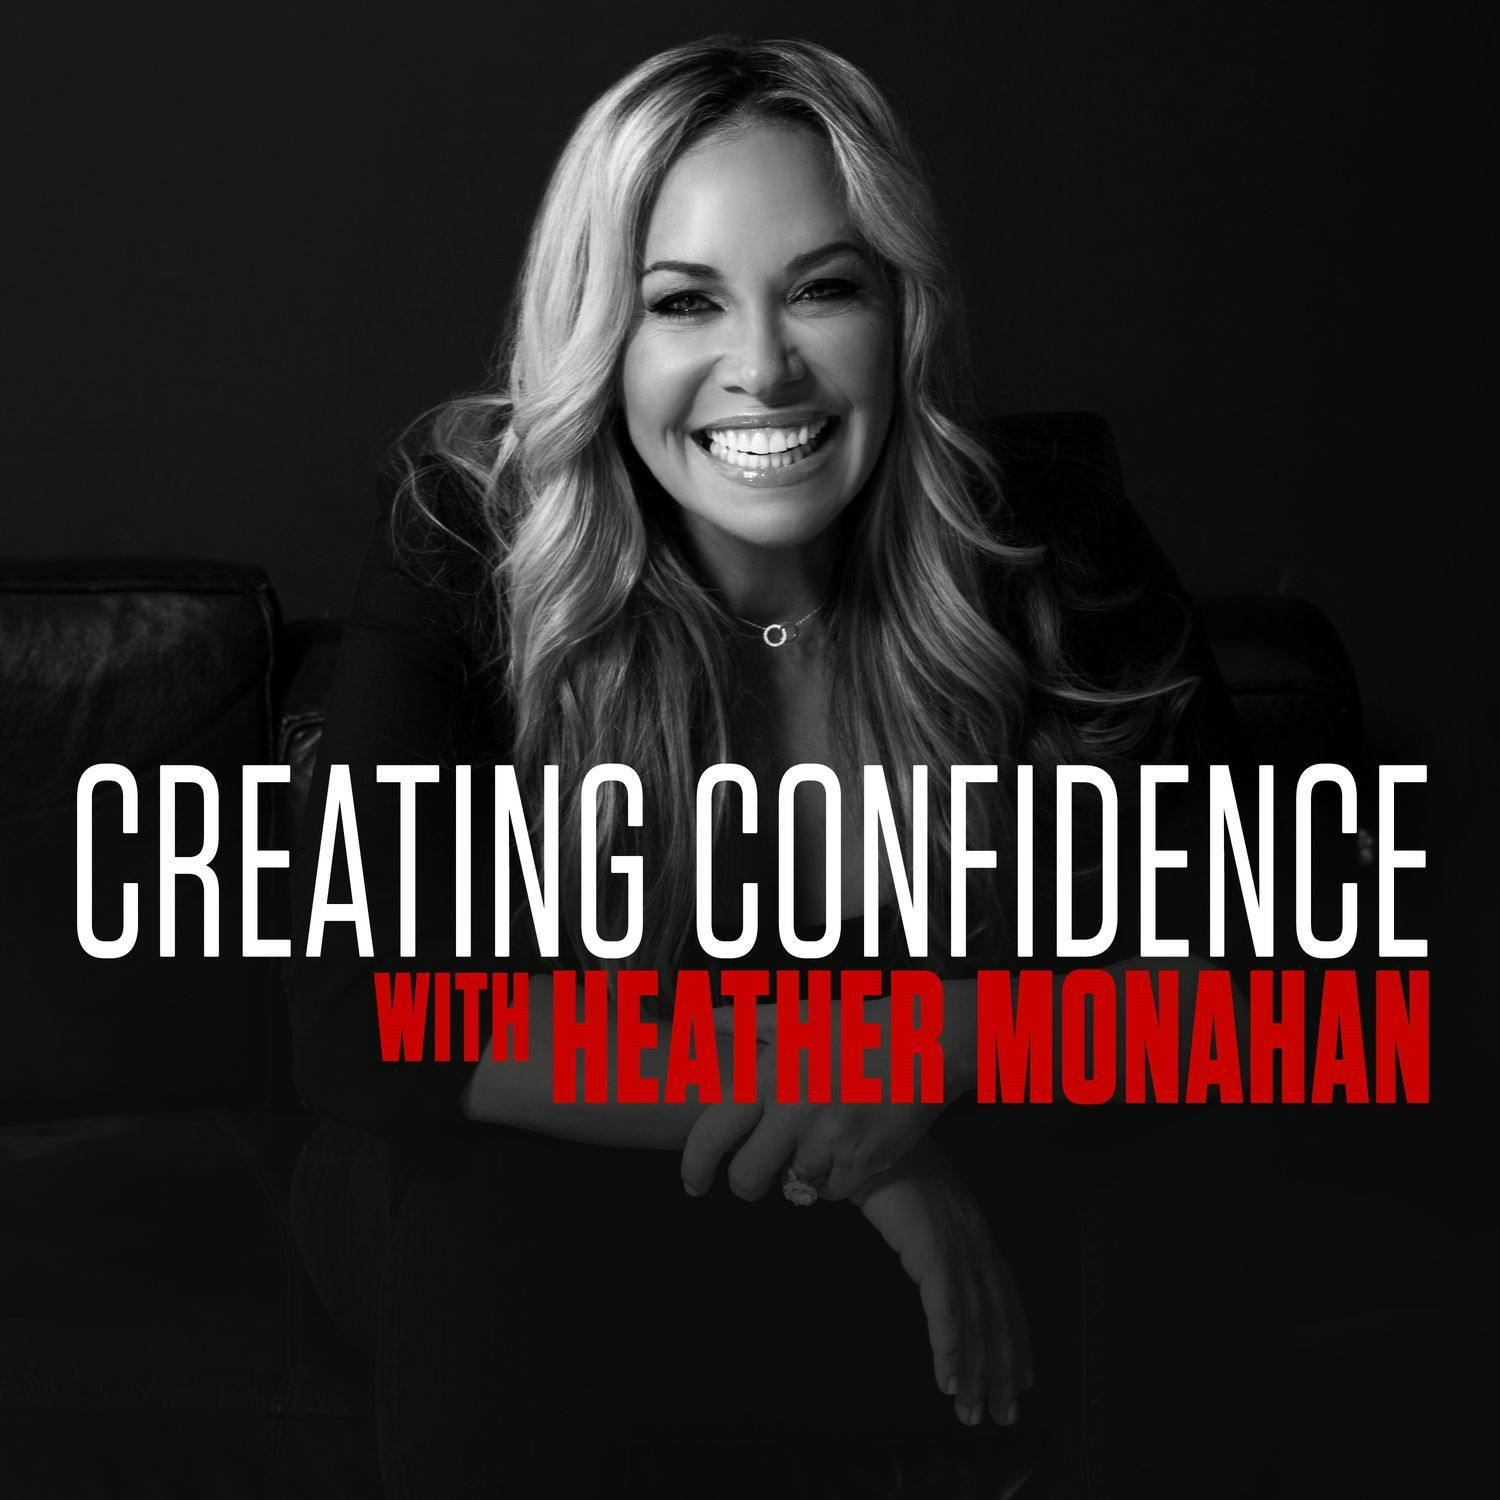 #189: Discover The POWER Of Your Voice! With Speaking Coach & Voice Expert Caroline Goyder  by Heather Monahan | YAP Media Network